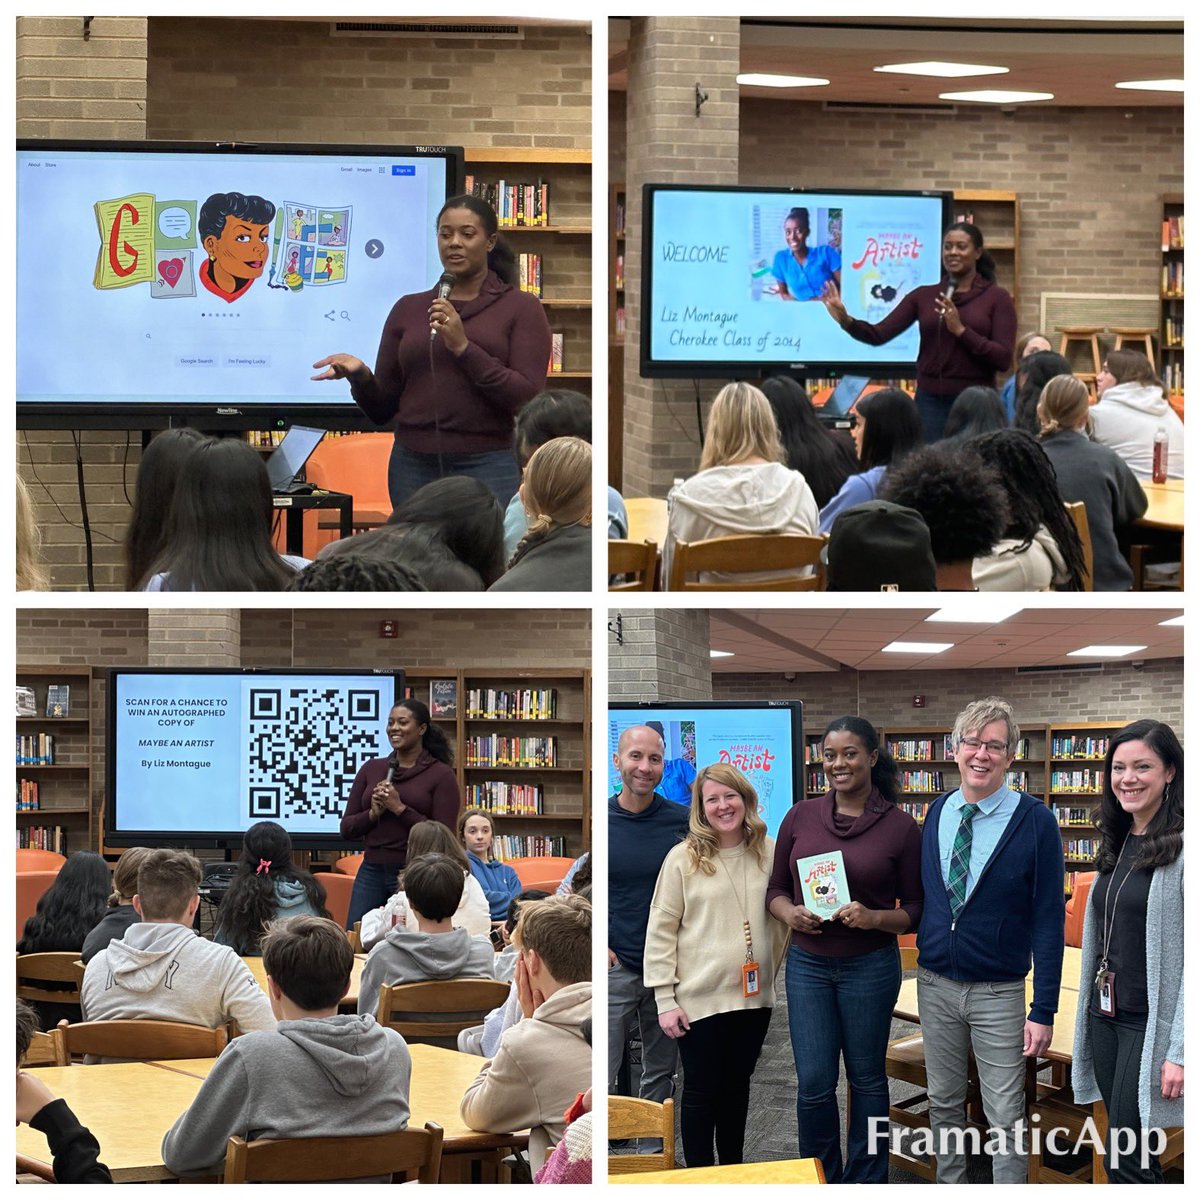 @lizatlarge Elizabeth Montague (Cherokee ‘14) Artist and Author of One Book selection “Maybe an Artist”- visited with English and Art Classes to talk about her journey and experiences from a student to a published author. Never give up on your dreams!